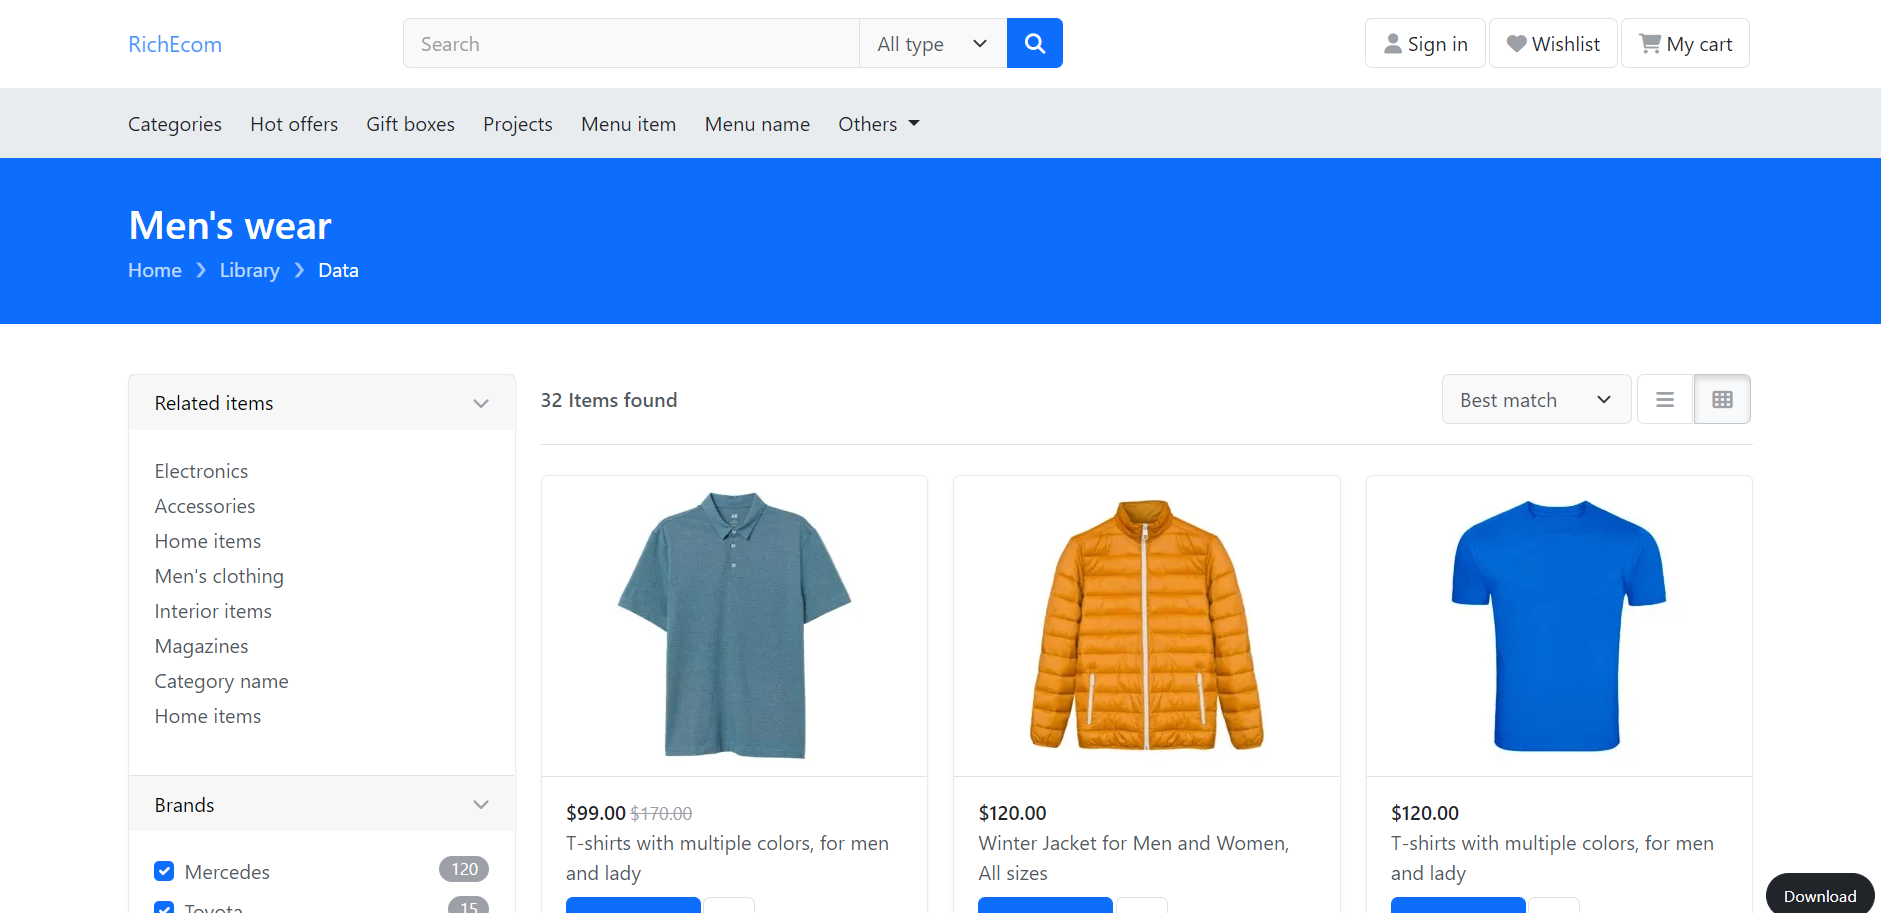 Angular 15 Ecommerce Website Shop Page Template with Filters